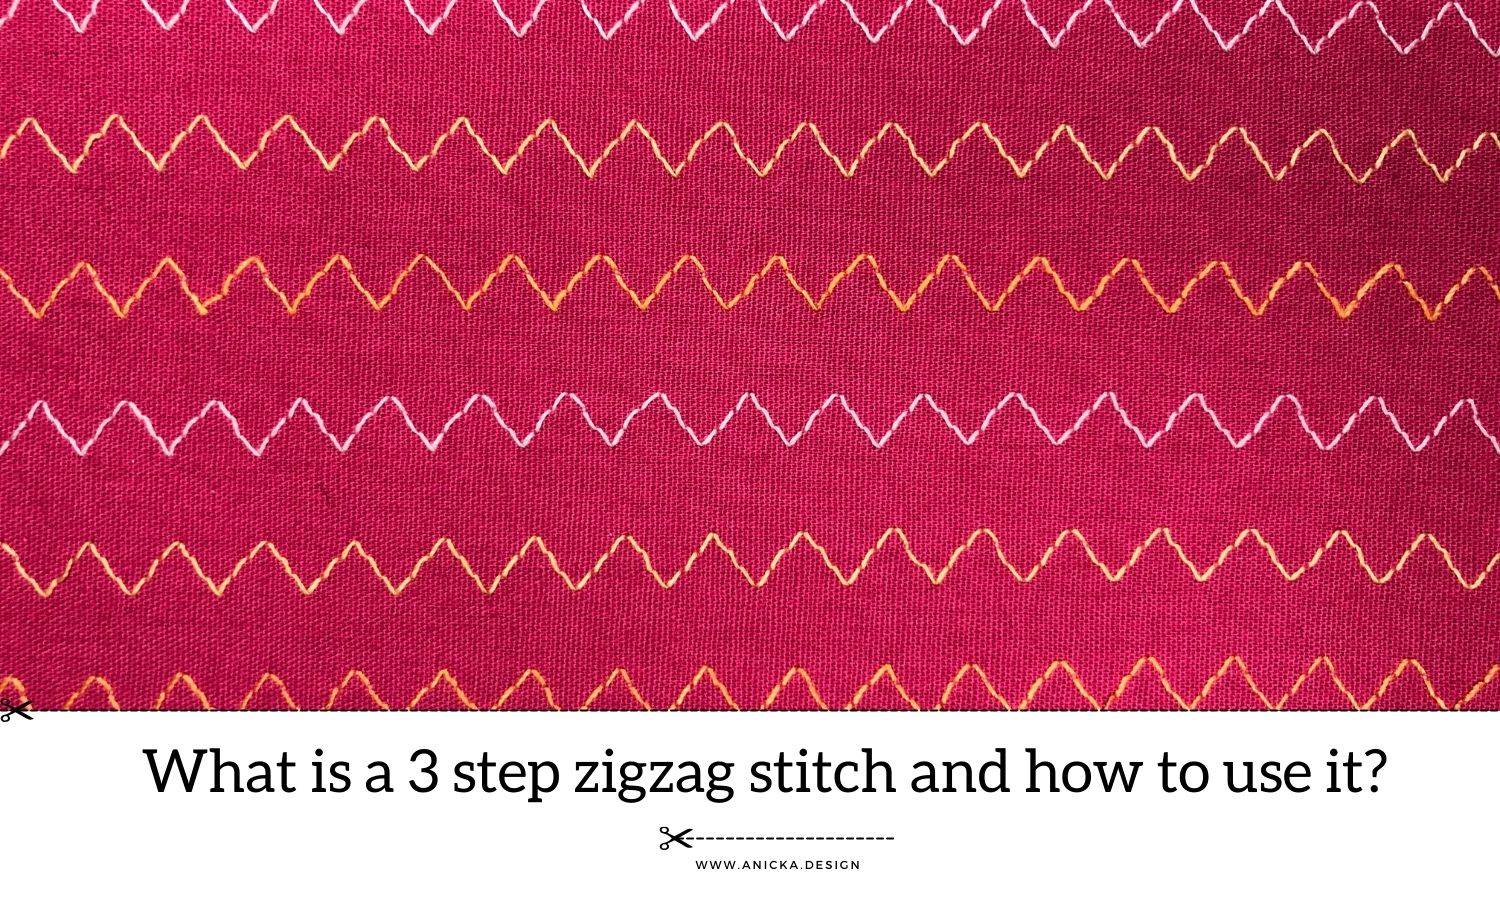 Examples of three step zigzag stitches.